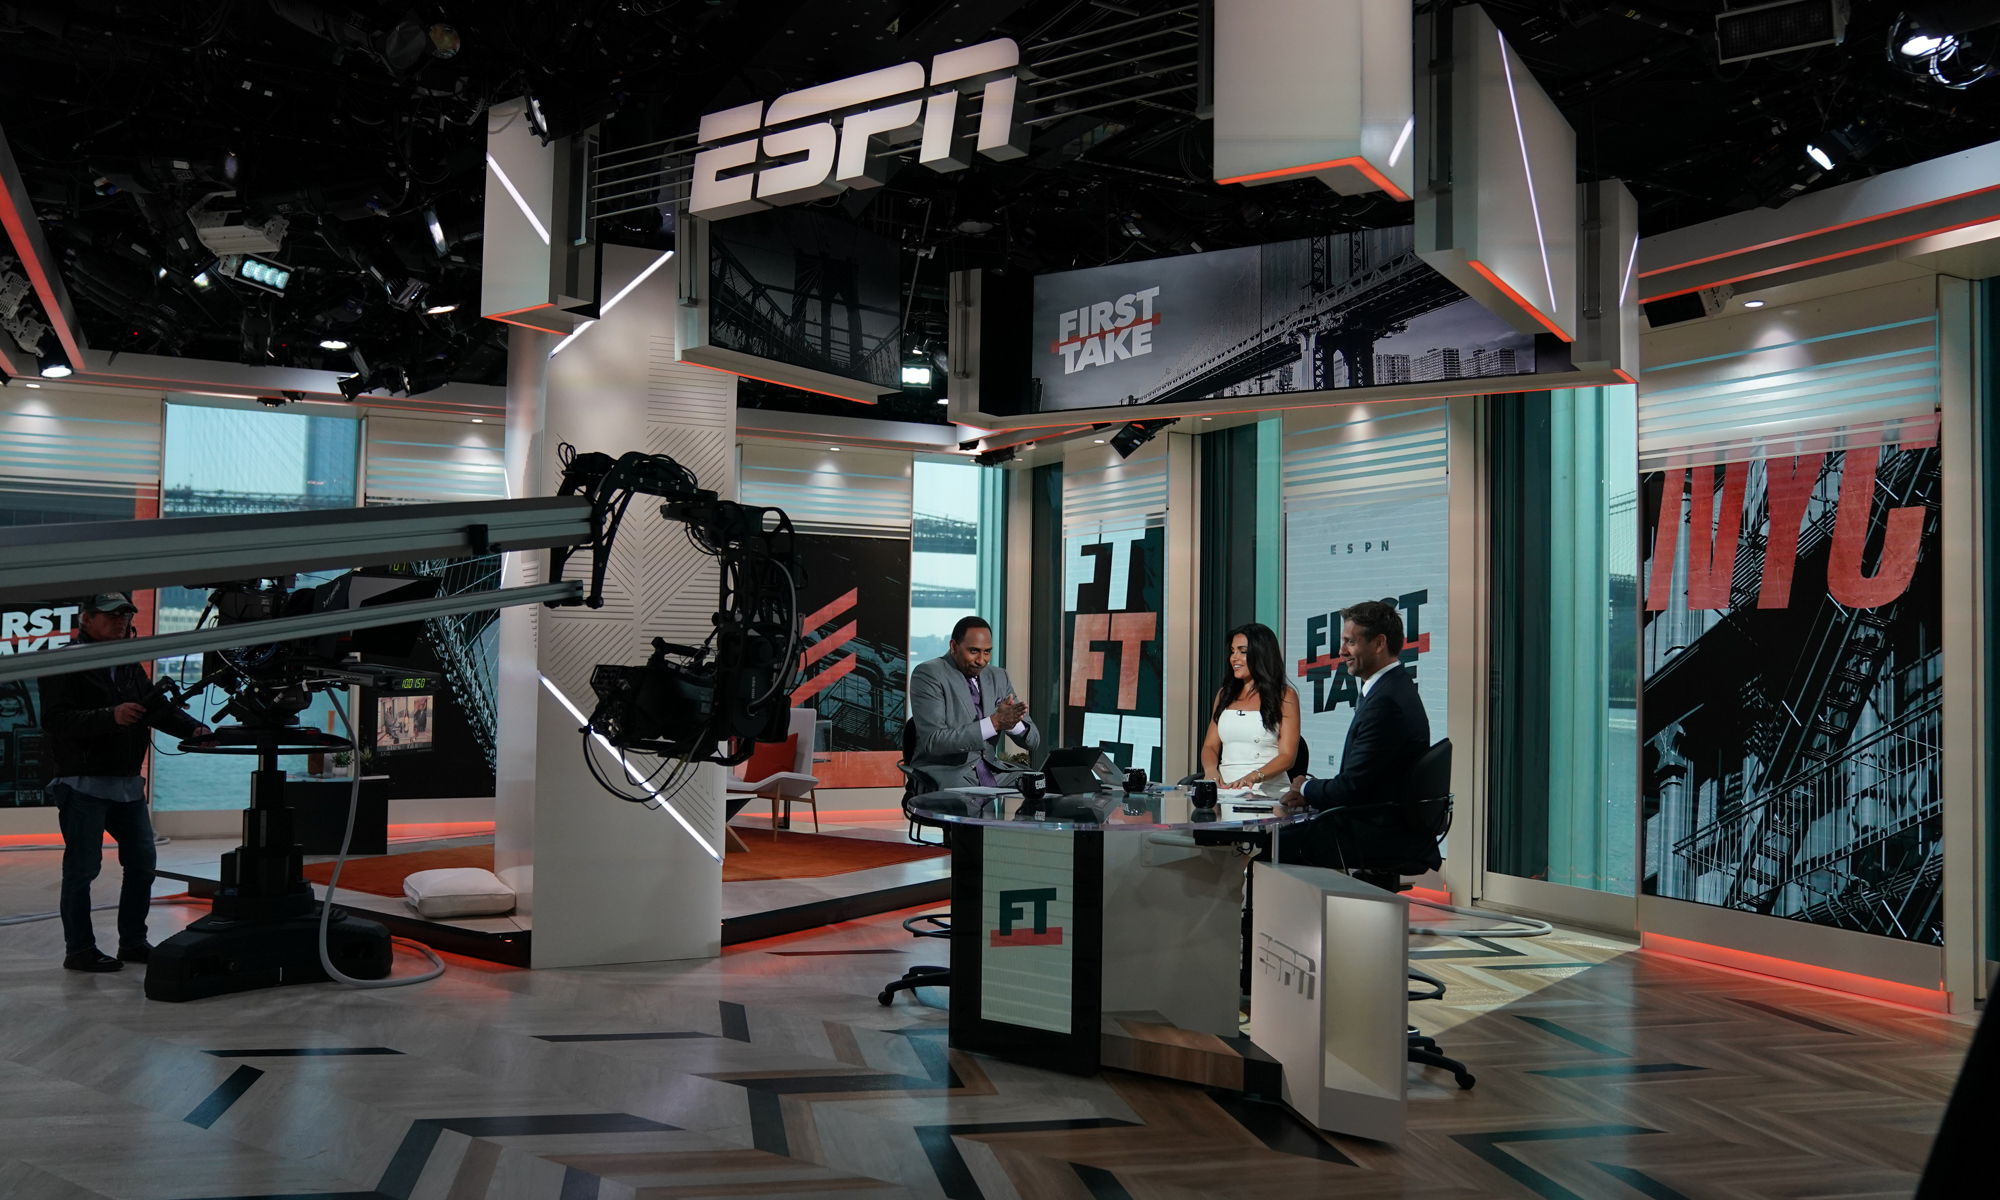 ESPN moves Super Bowl broadcast location from Midtown to Downtown